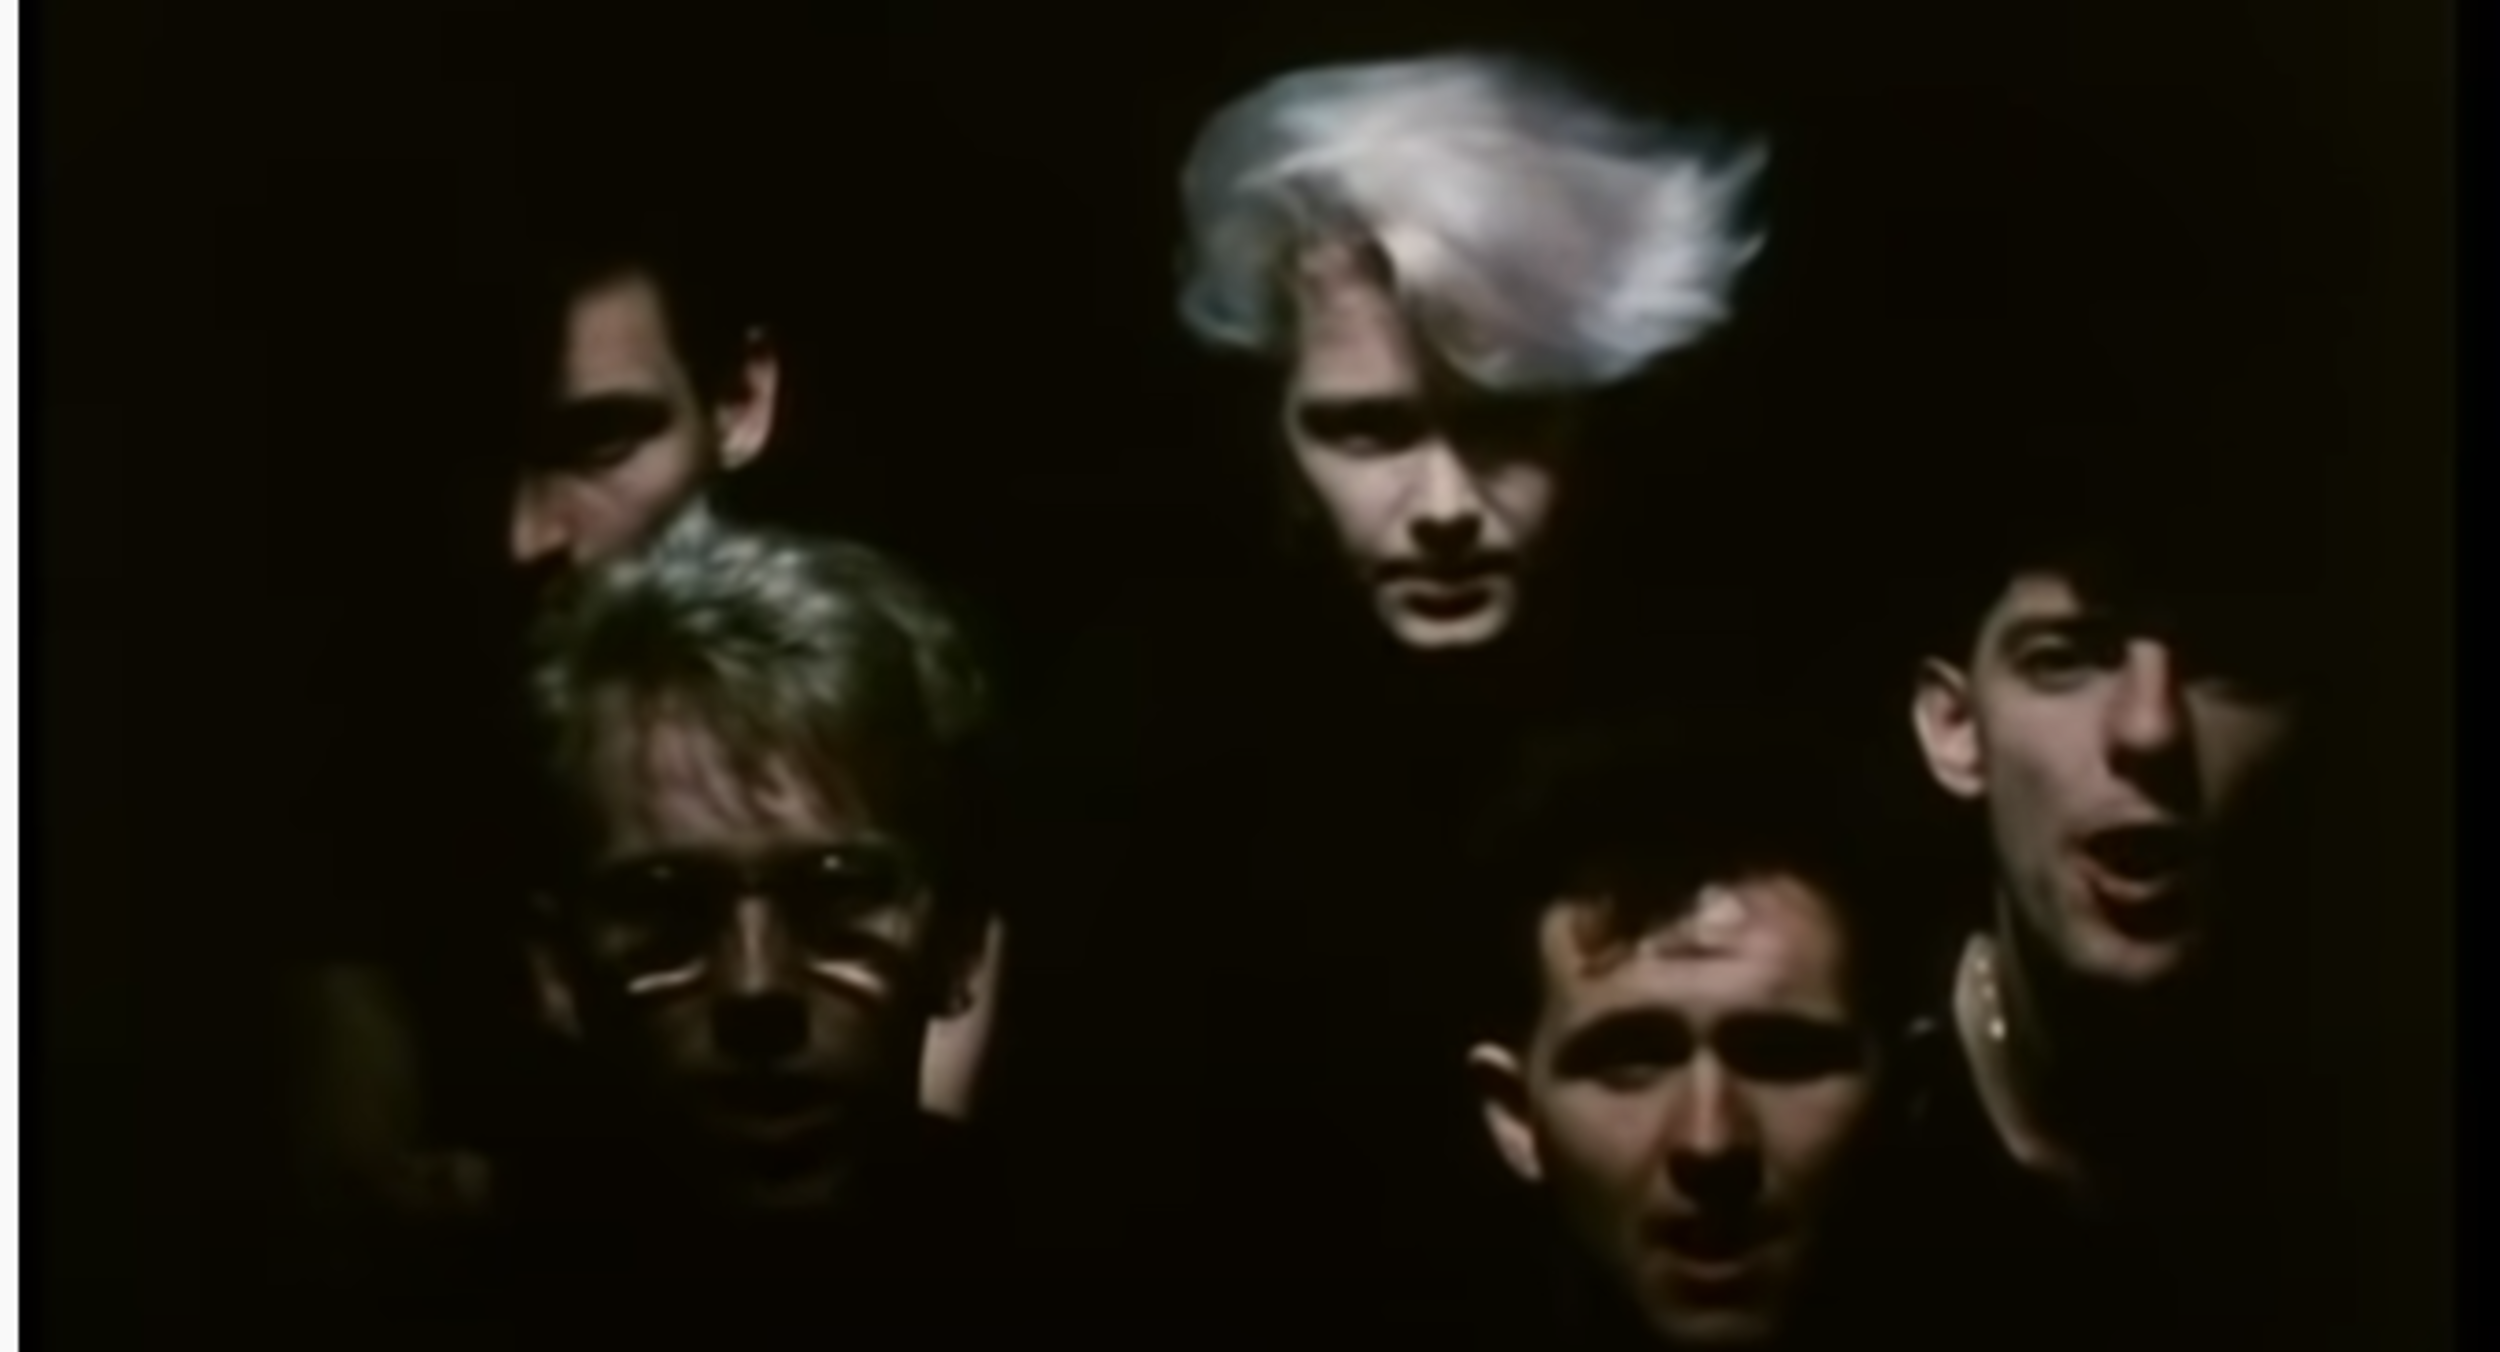 <p>This English new wave outfit was far more popular at home in the United Kingdom than in the U.S. And while <a href="https://www.youtube.com/watch?v=LuN6gs0AJls">"I Melt with You"</a> peaked at No. 78 on the <em>Billboard</em> Hot 100, it remains a memorable track to those of a certain age who are fans of its inclusion in the Nicholas Cage-cult classic vehicle <a href="https://www.youtube.com/watch?v=VSX4YgdKKMk"><em>Valley Girl</em></a>. Though Modern English never enjoyed sustained success in the U.S., the song is still a Spotify favorite to Baby Boomers and Gen-Xers.</p><p><a href='https://www.msn.com/en-us/community/channel/vid-cj9pqbr0vn9in2b6ddcd8sfgpfq6x6utp44fssrv6mc2gtybw0us'>Follow us on MSN to see more of our exclusive entertainment content.</a></p>